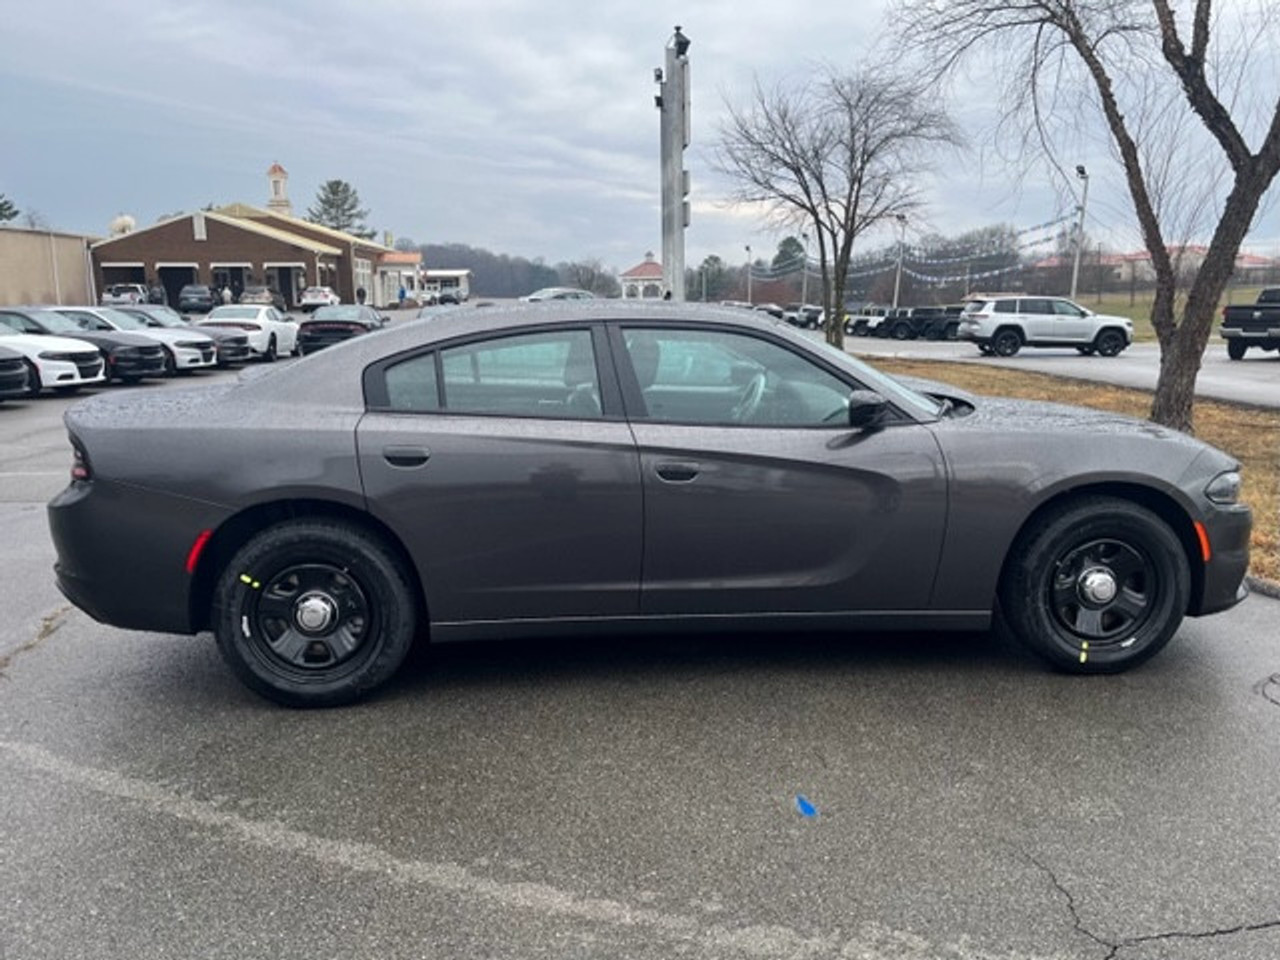 New 2023 Gray Dodge Charger PPV V8 RWD ready to be built as a Marked Patrol Package Police Pursuit Car (Emergency Lighting, Siren, Controller, Partition, Window Bars, etc.), + Delivery, G2